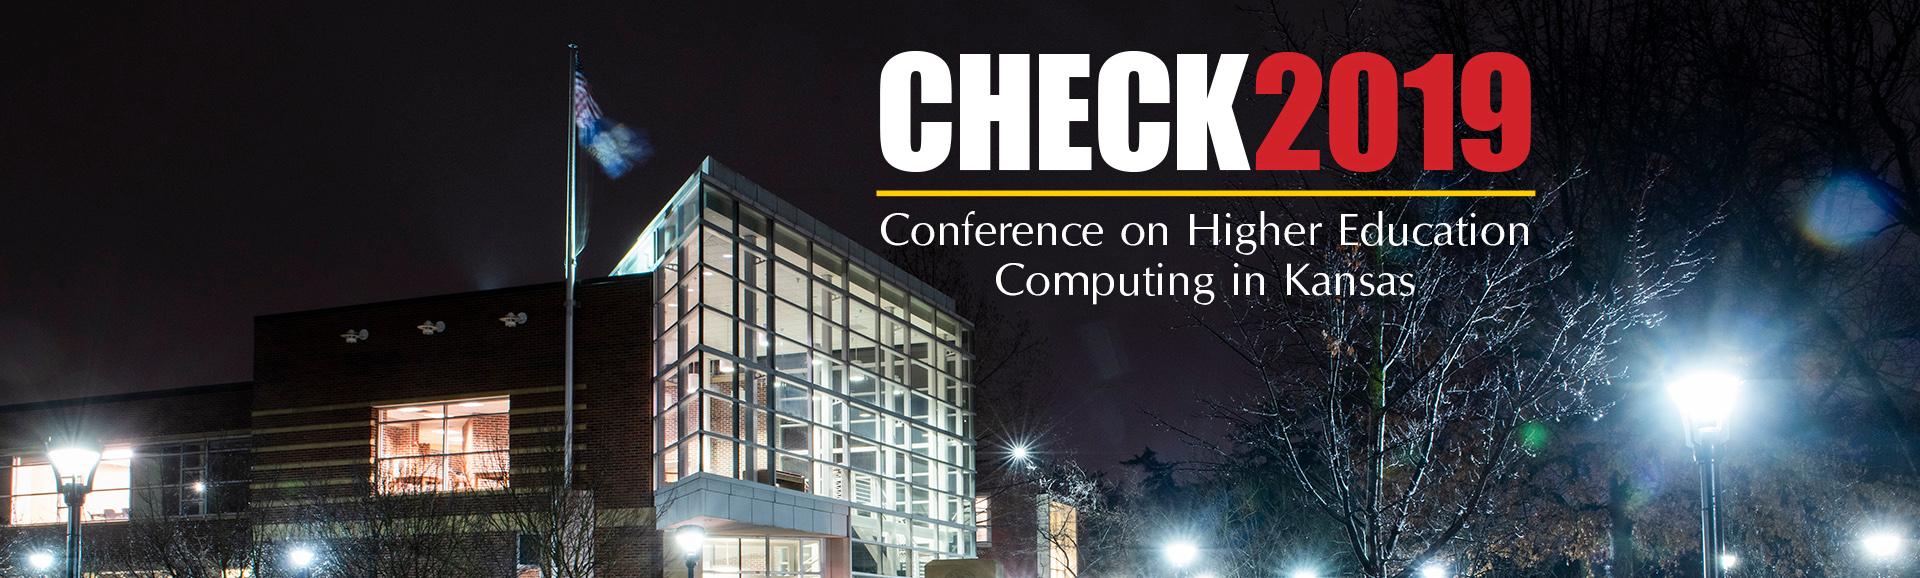 CHECK 2019 Conference Banner